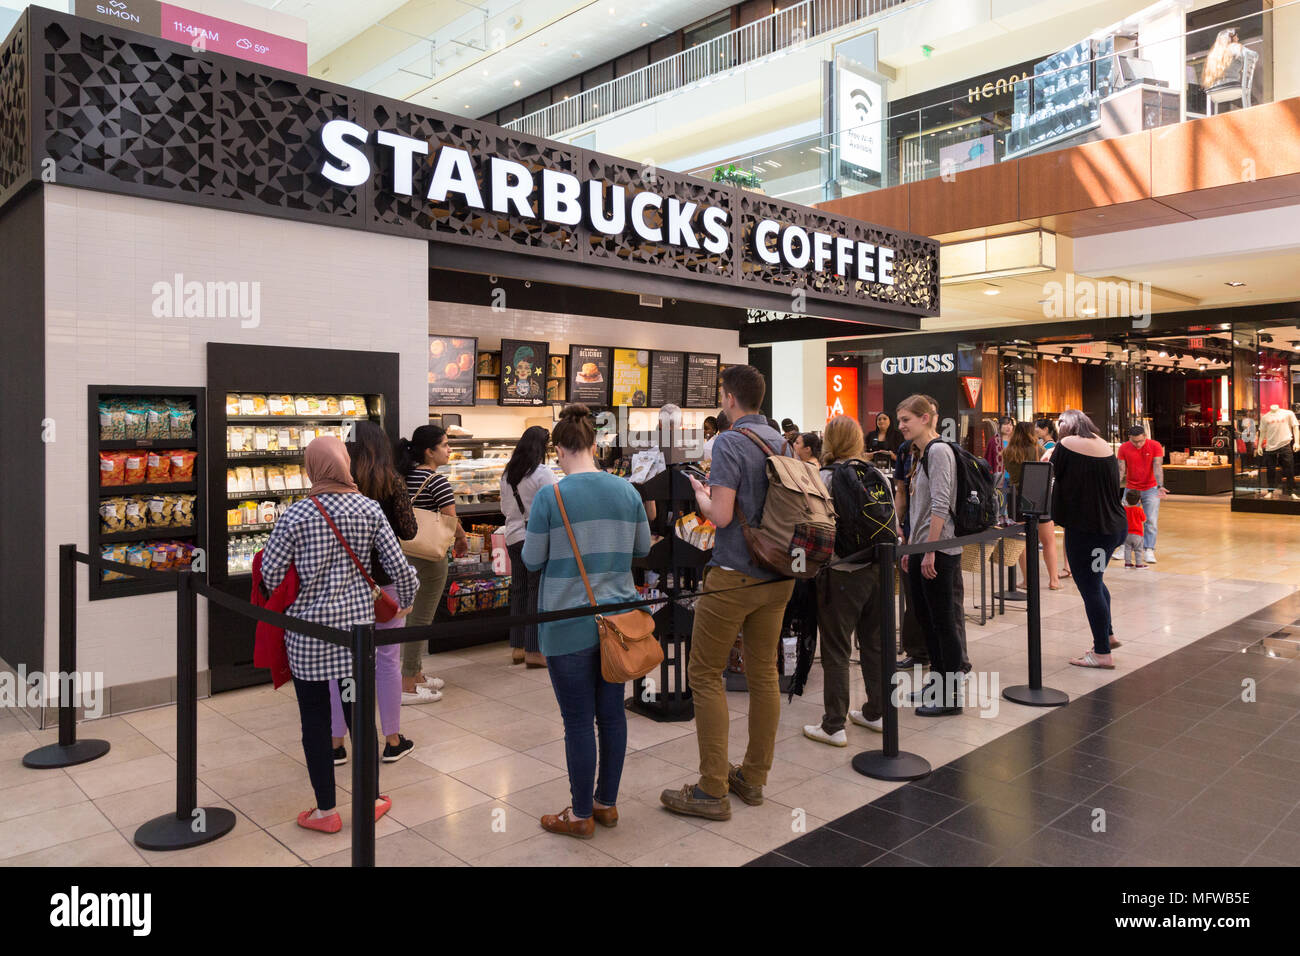 Starbucks Coffee bar, and queue of customers, The Galleria Shopping Mall, Houston, Texas USA Stock Photo